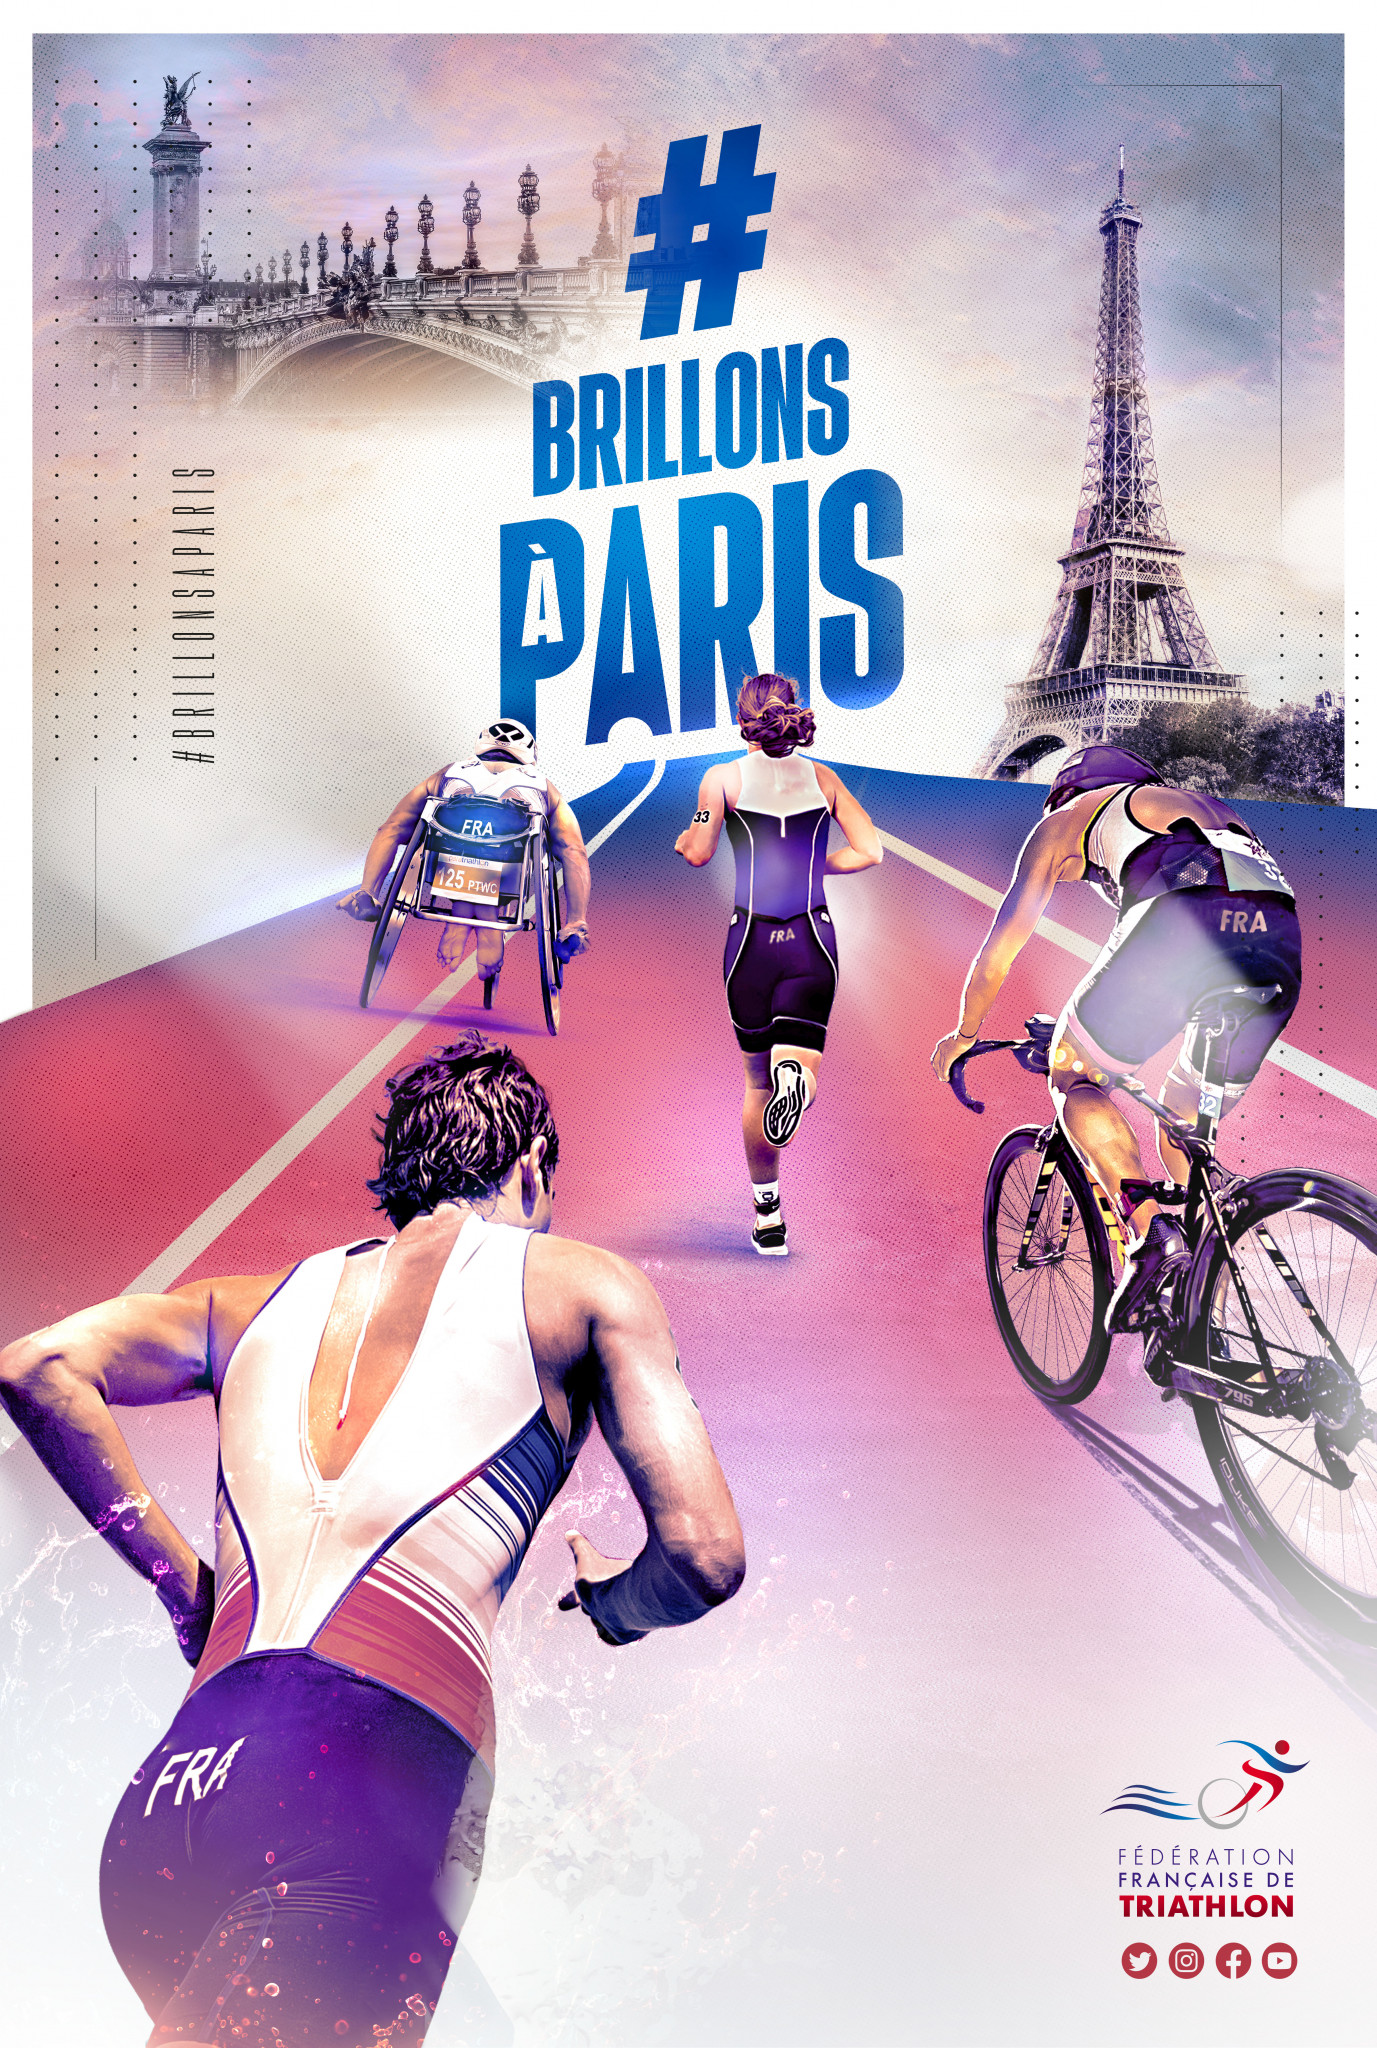 World Triathlon claims that it remains confident its Olympic and Paralympics test event for Paris 2024 will go ahead as planned ©FFTRI